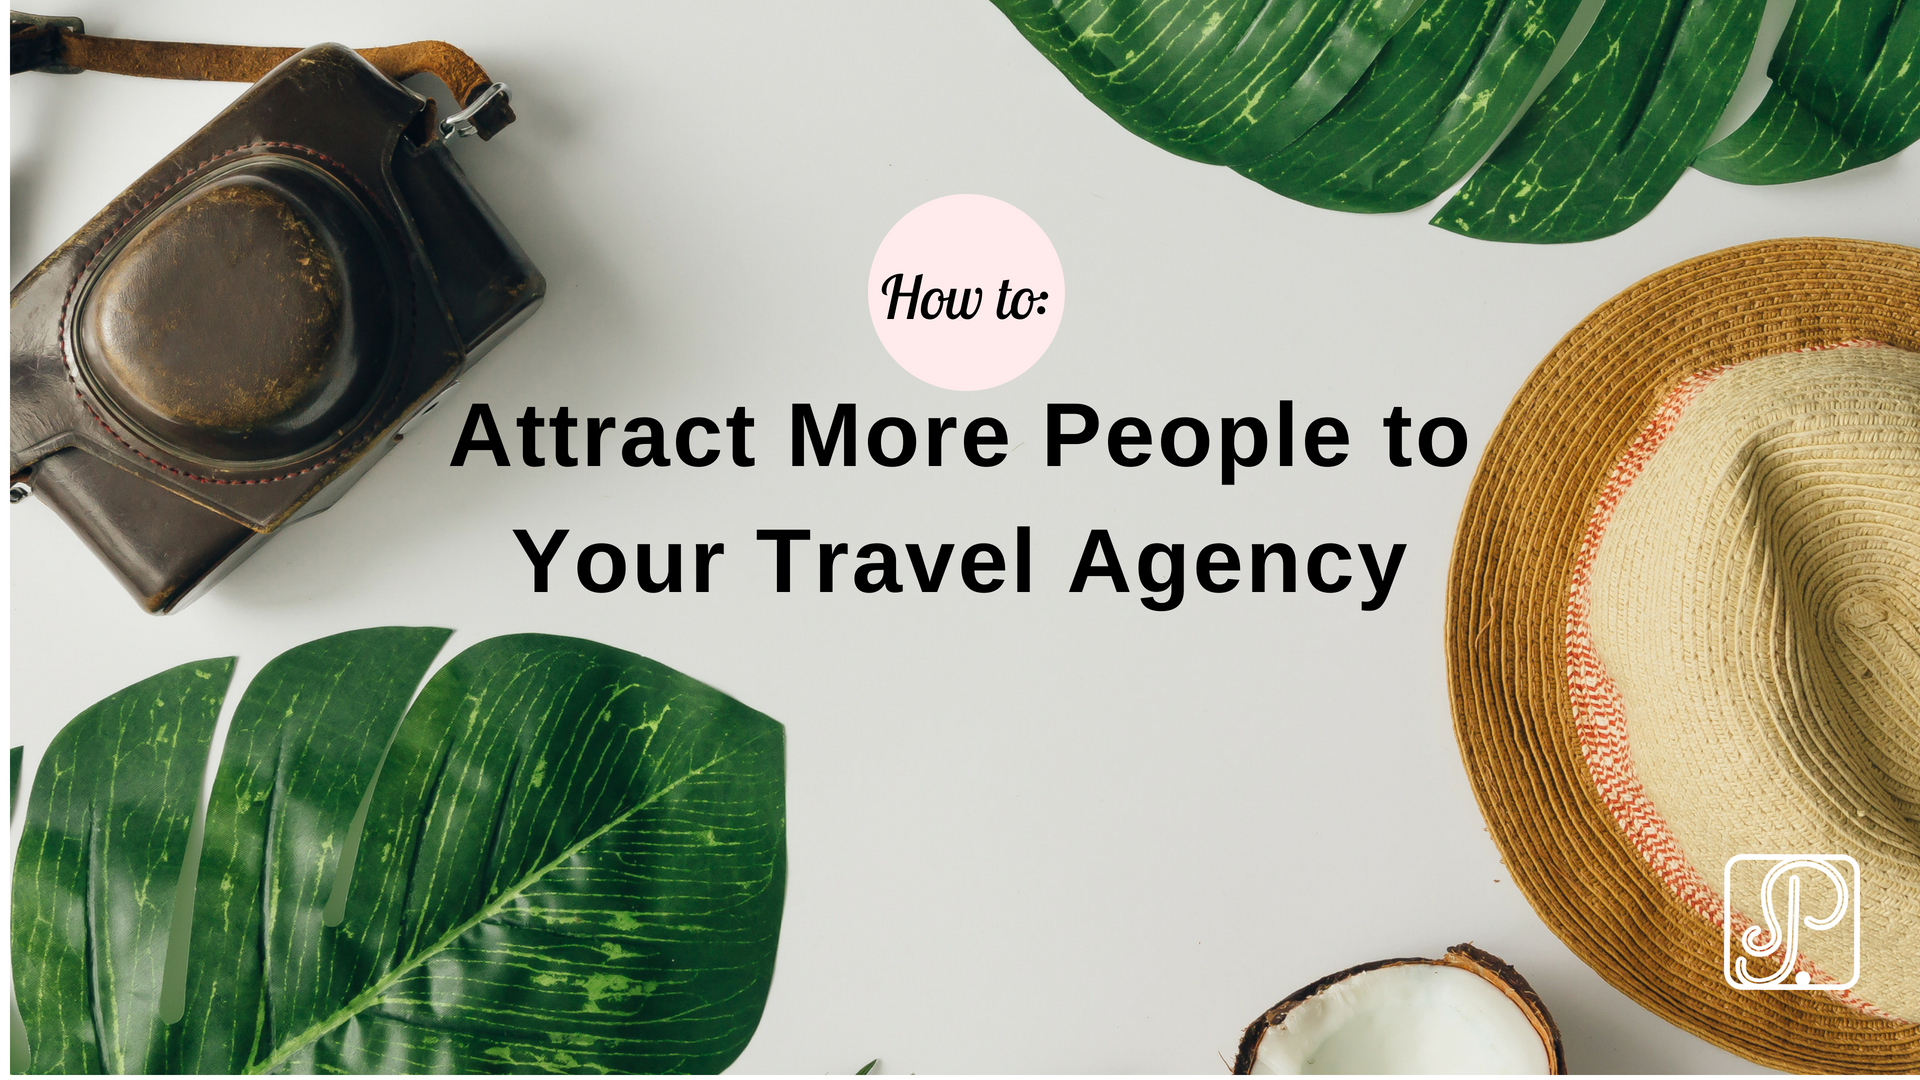 How to Attract More People to Your Travel Agency